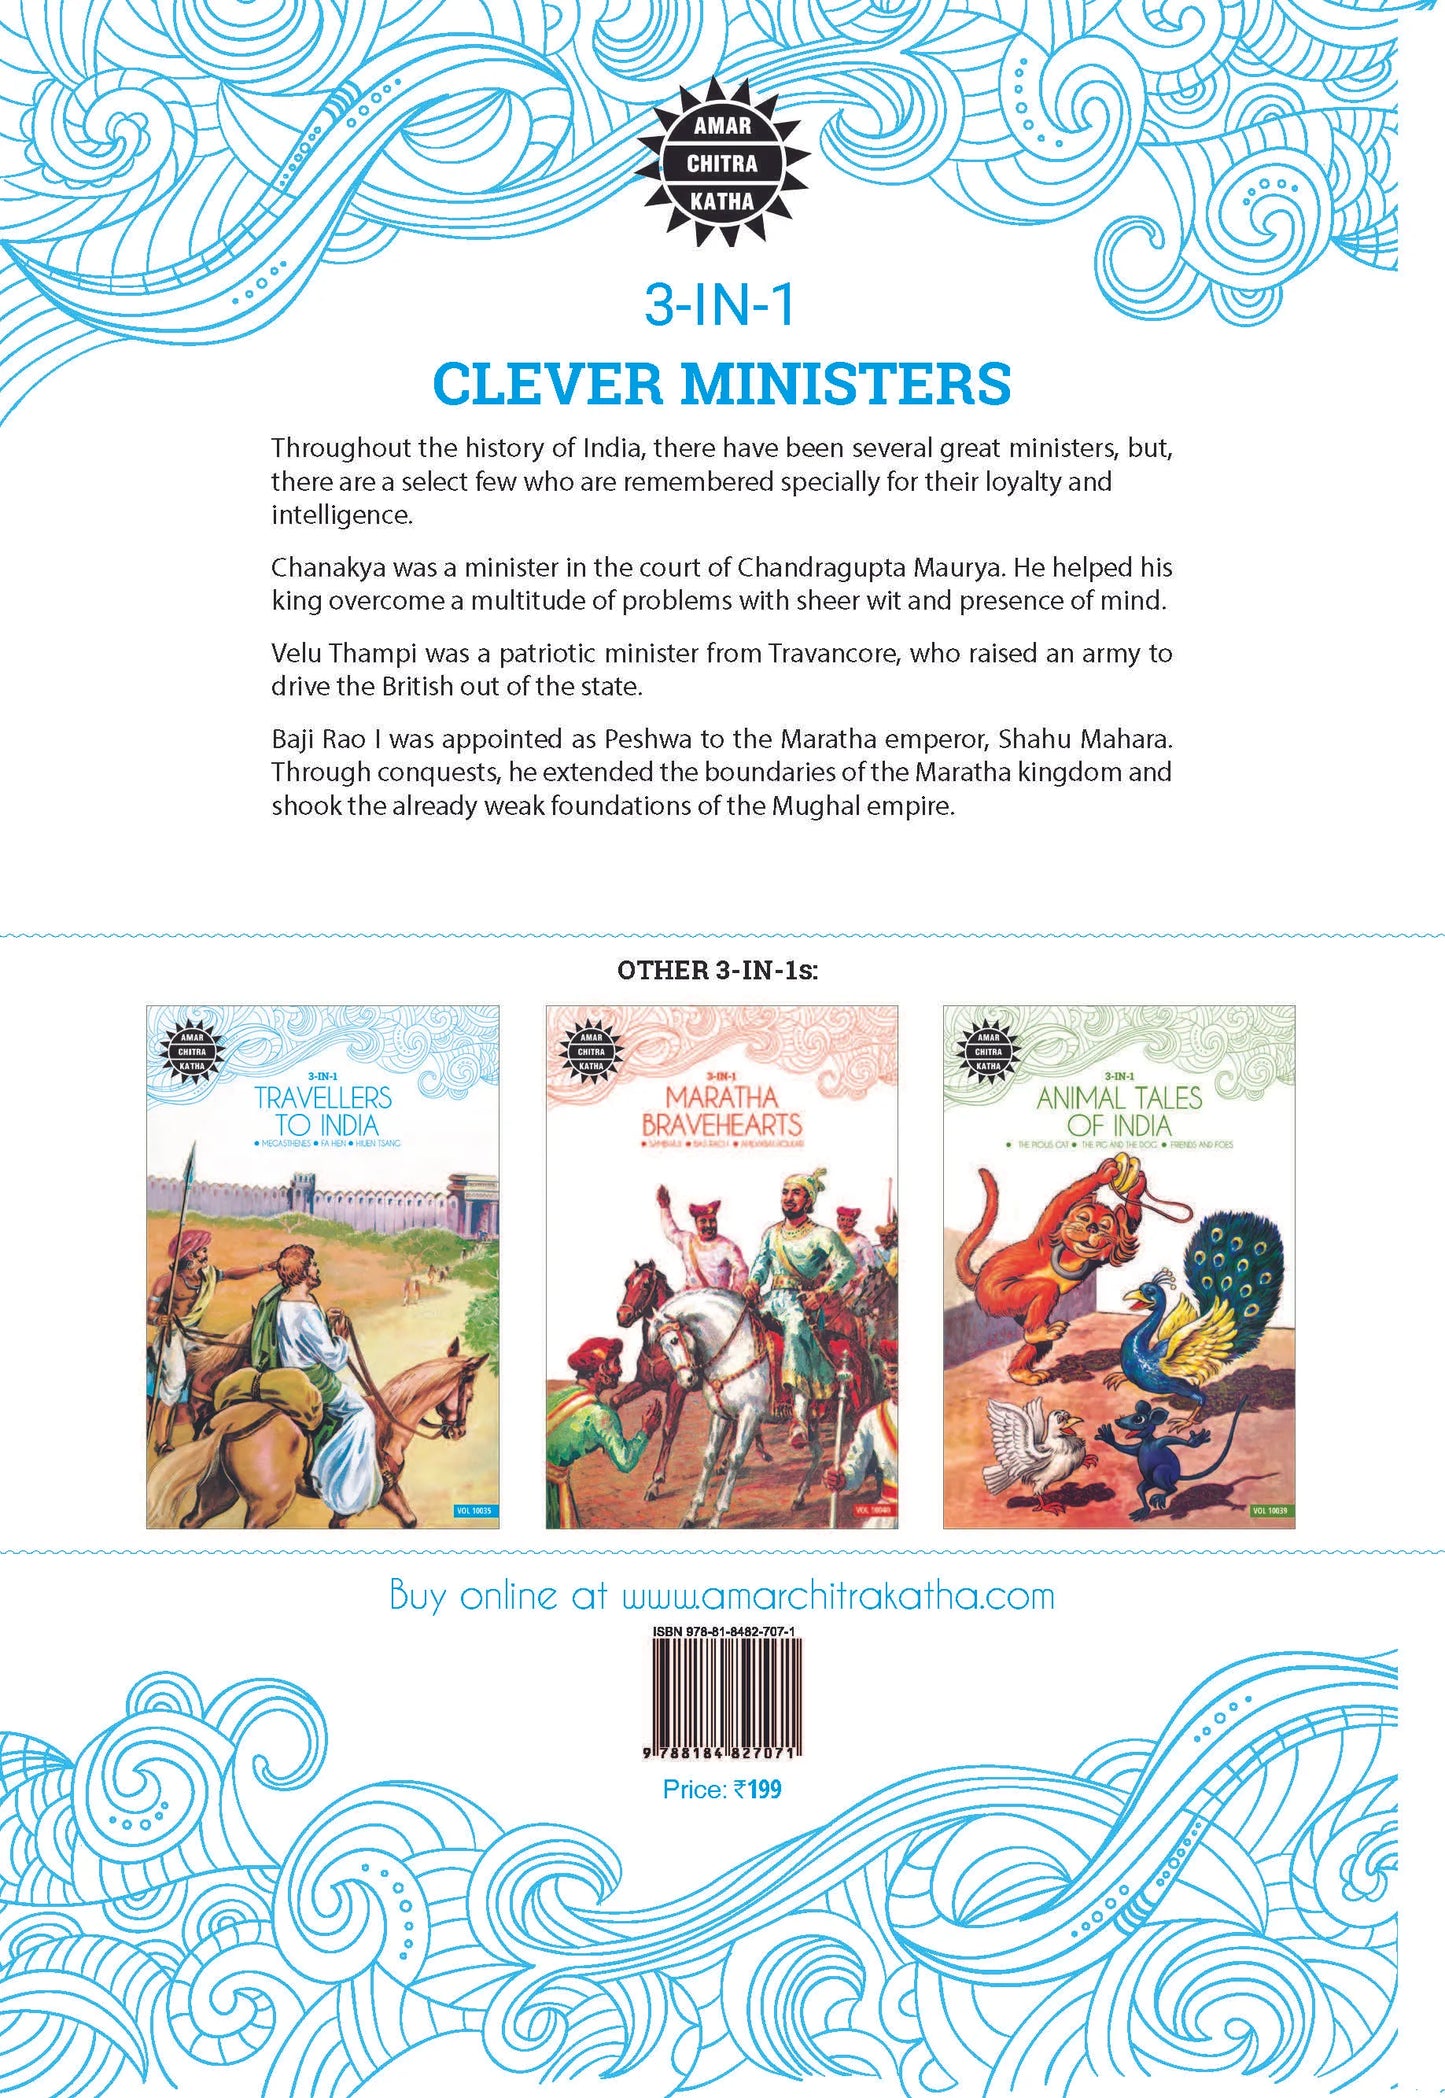 Amar Chitra Katha - Clever Minister 3 in 1